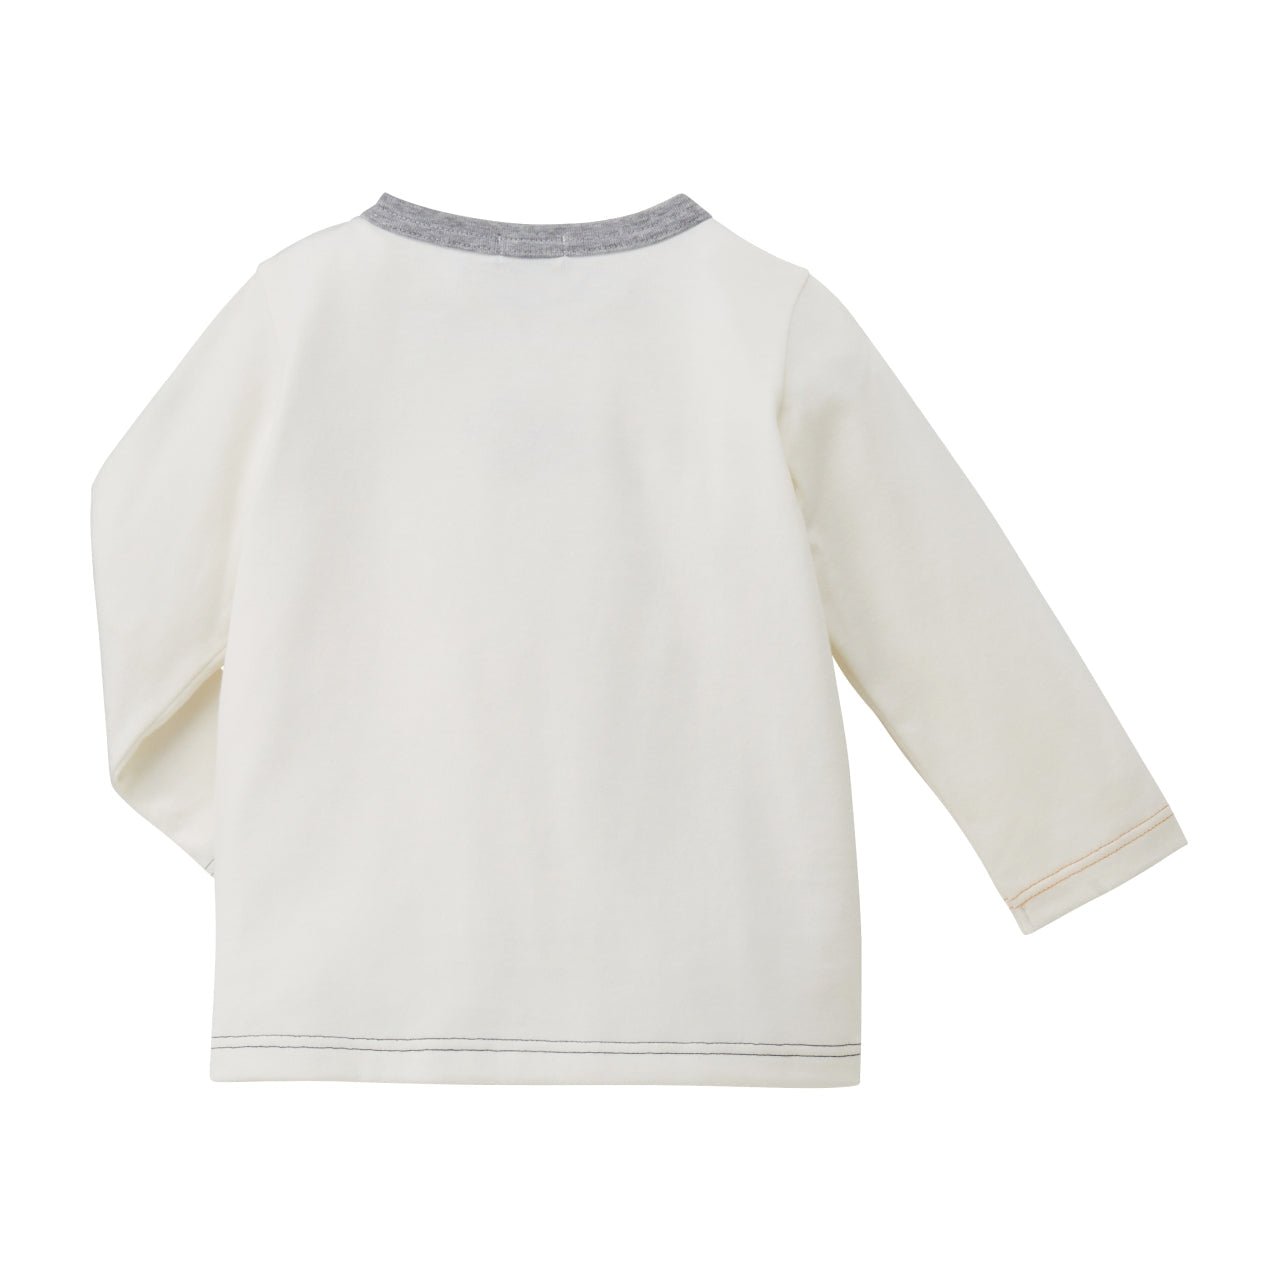 Classic DOUBLE_B Long Sleeve Tee in White - 60-5225-570-01-80